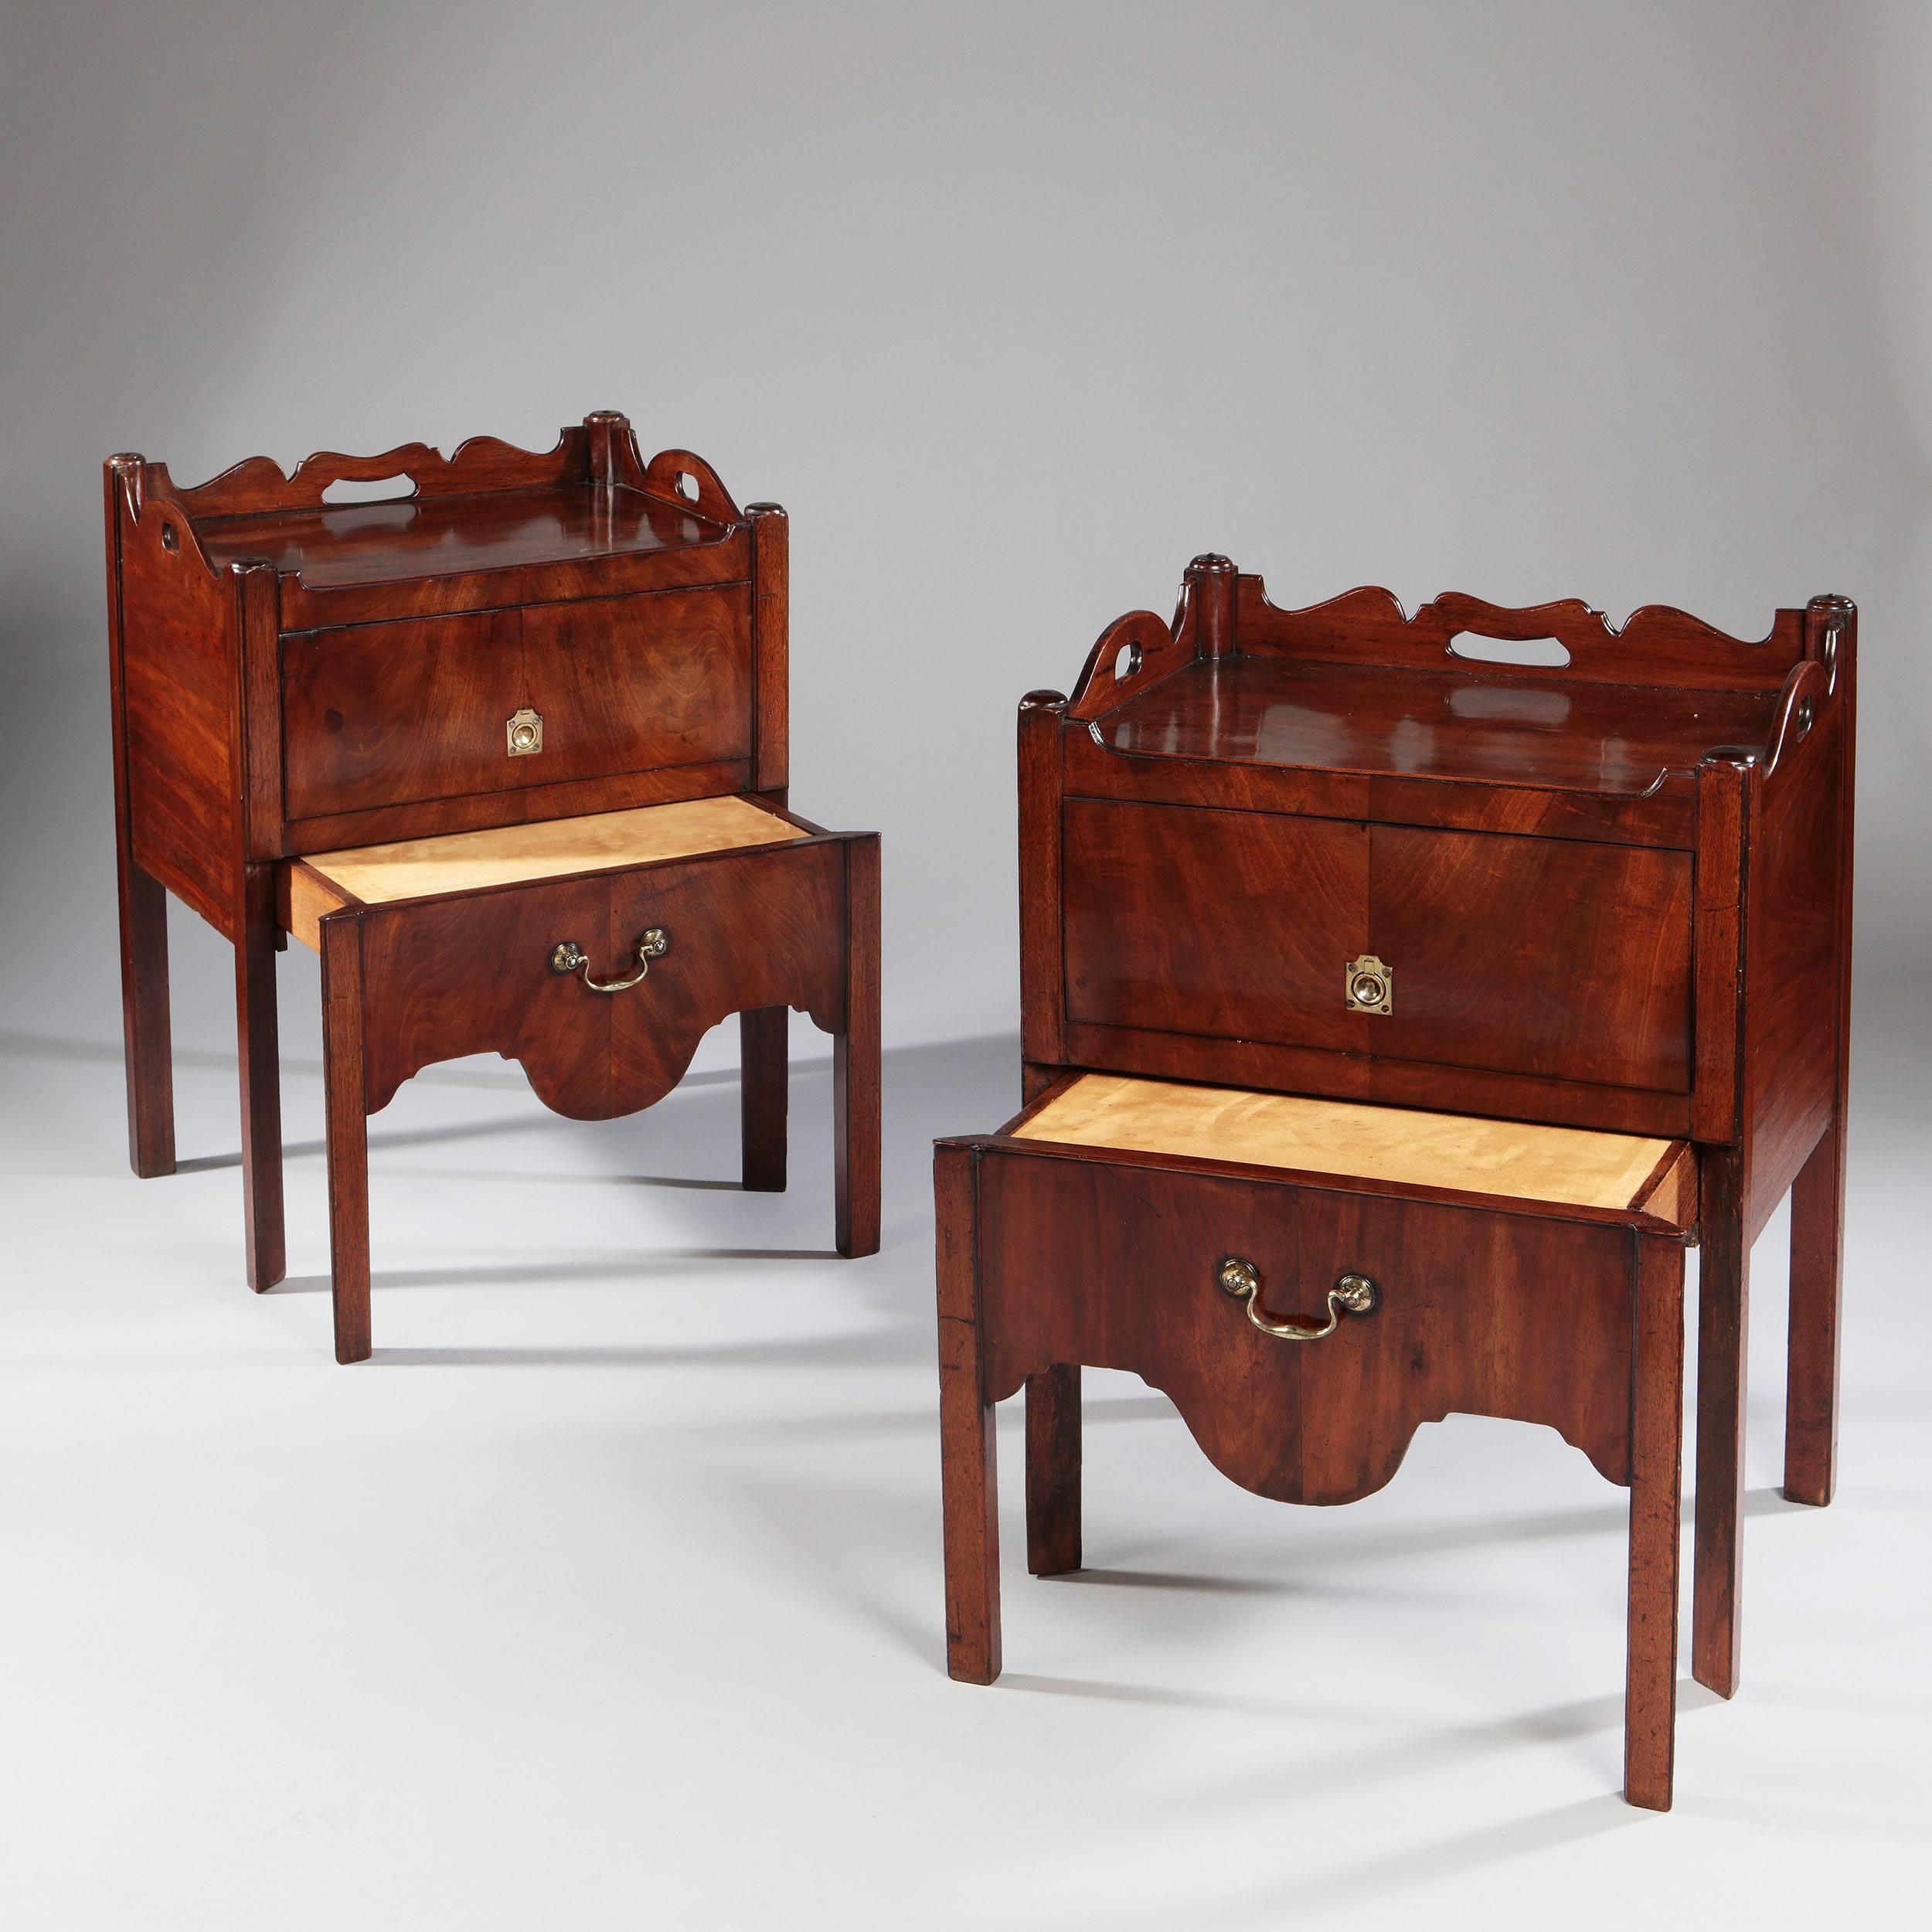 A matched pair of mid-18th century mahogany tray top bedside commodes of generous scale.